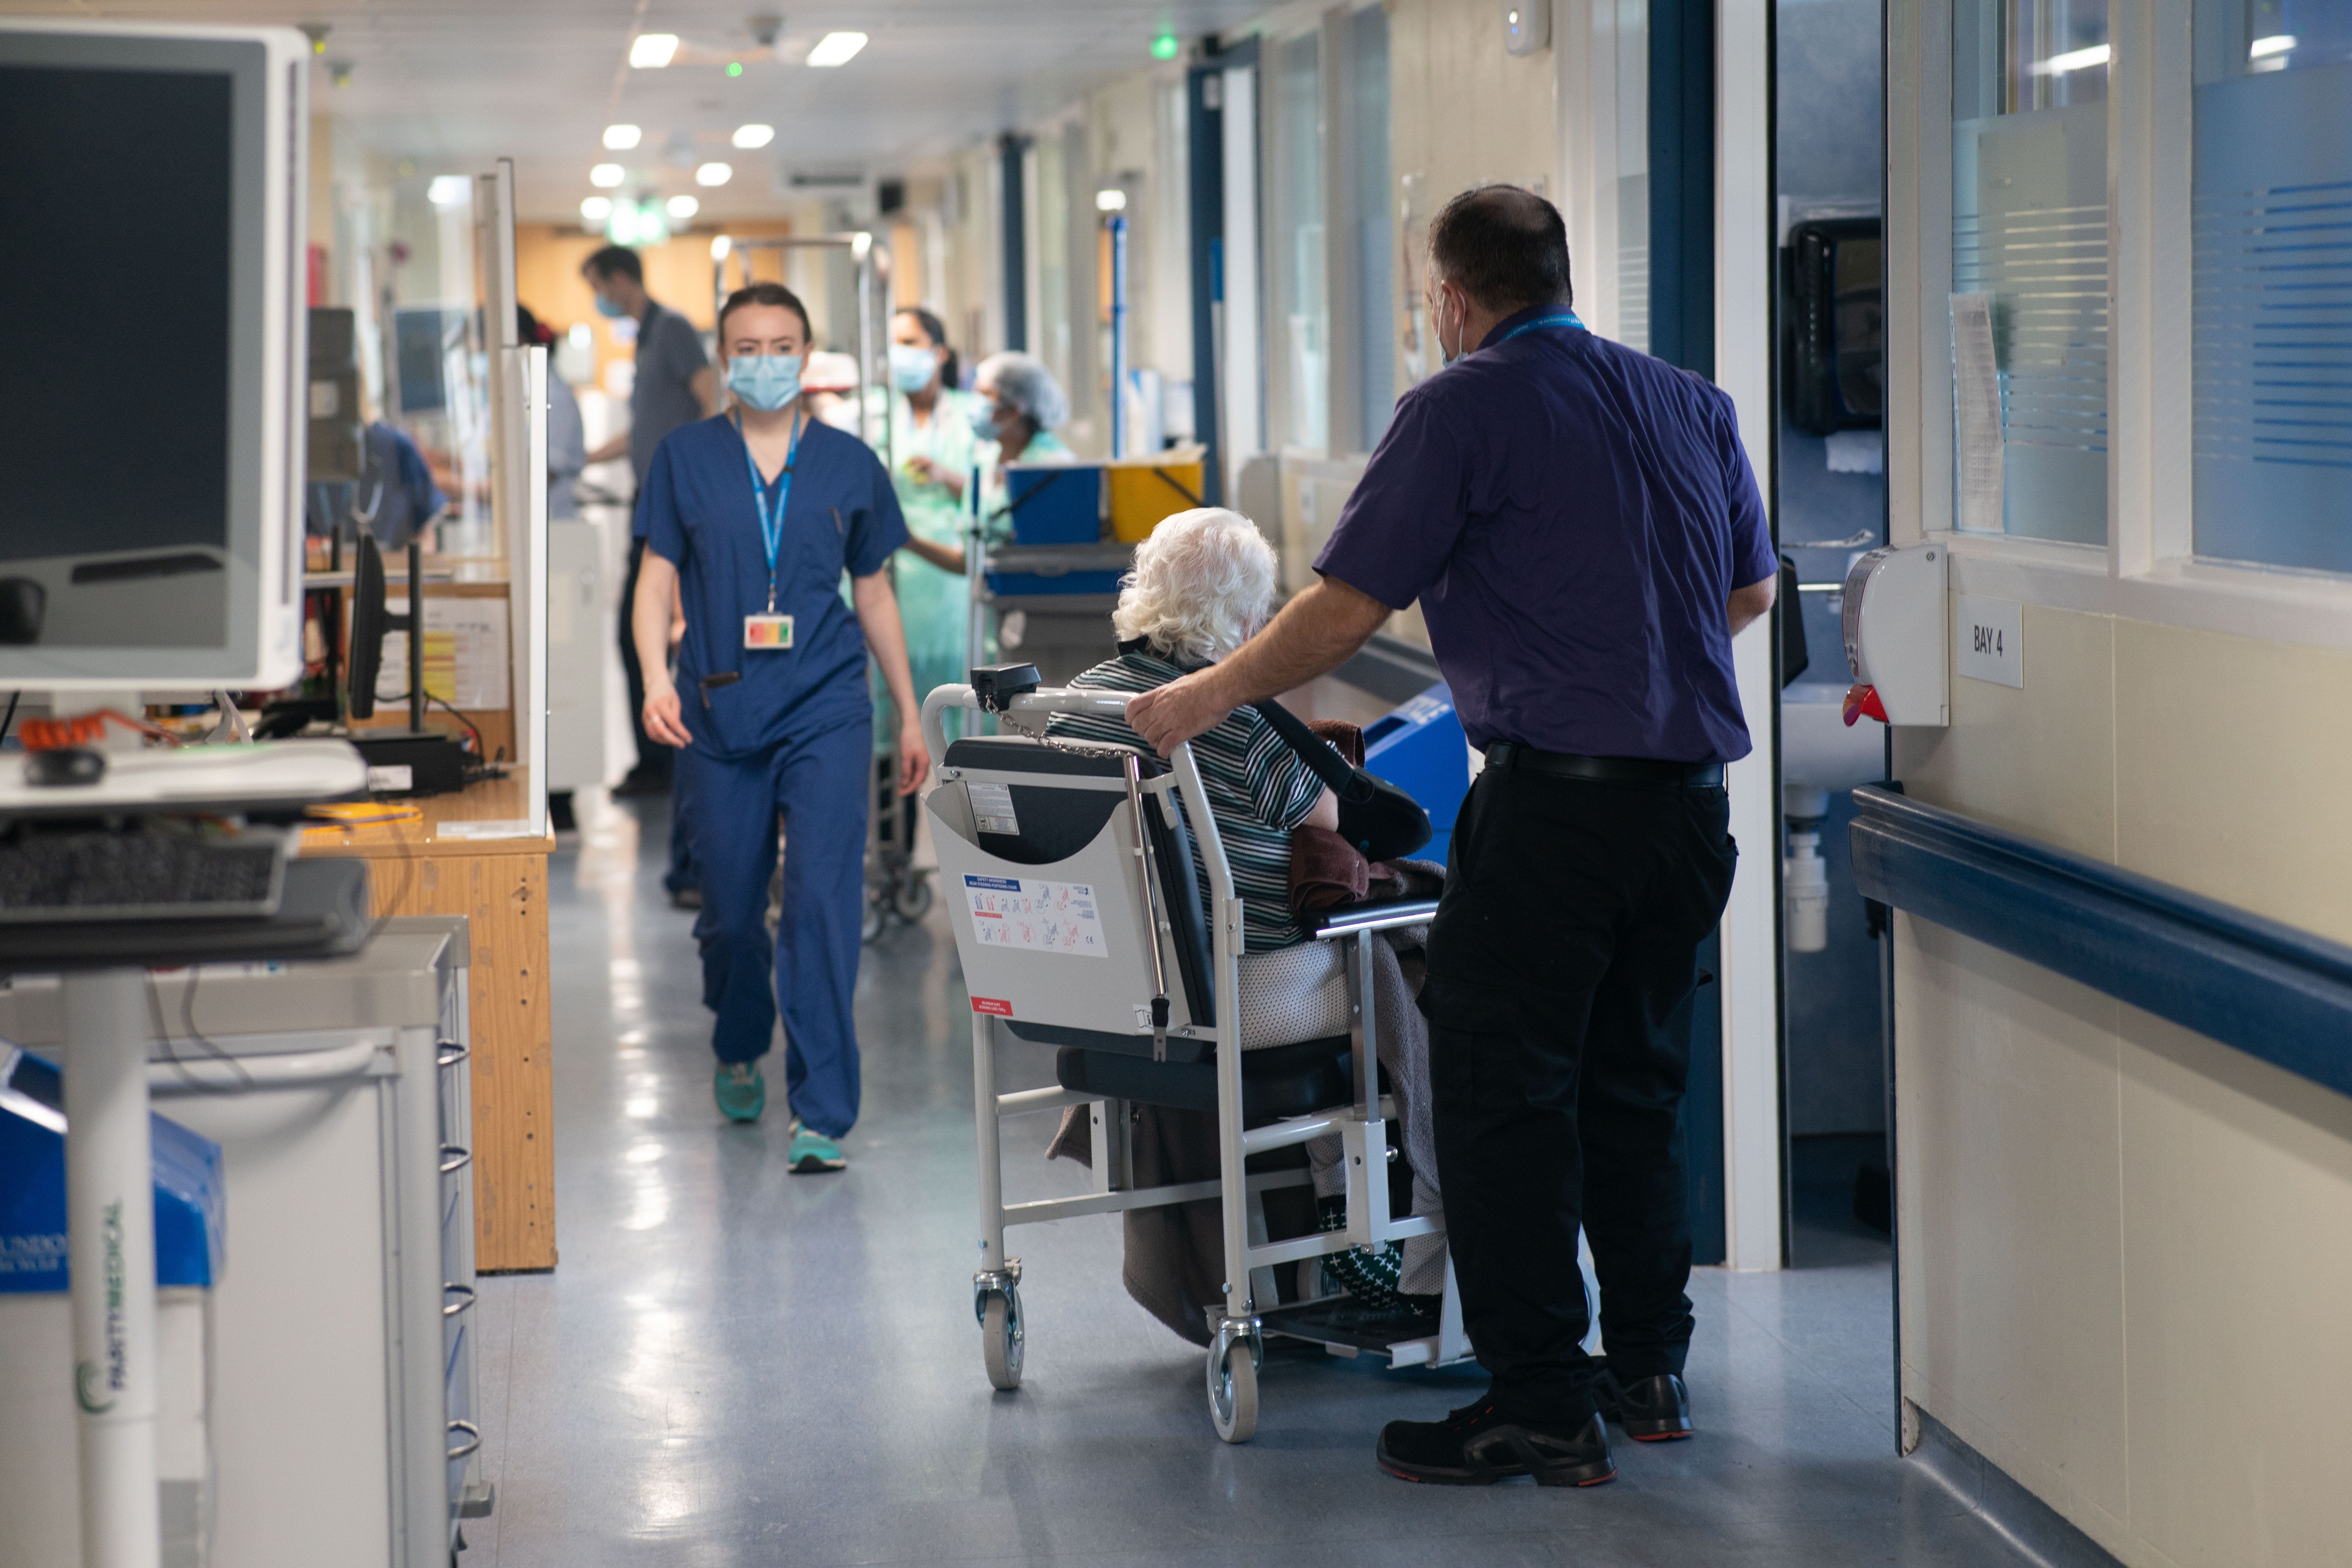 NHS managers are worried about the quality of patient care and many believe Prime Minister Rishi Sunak’s commitment to cut waiting lists will be difficult to achieve, according to a new report